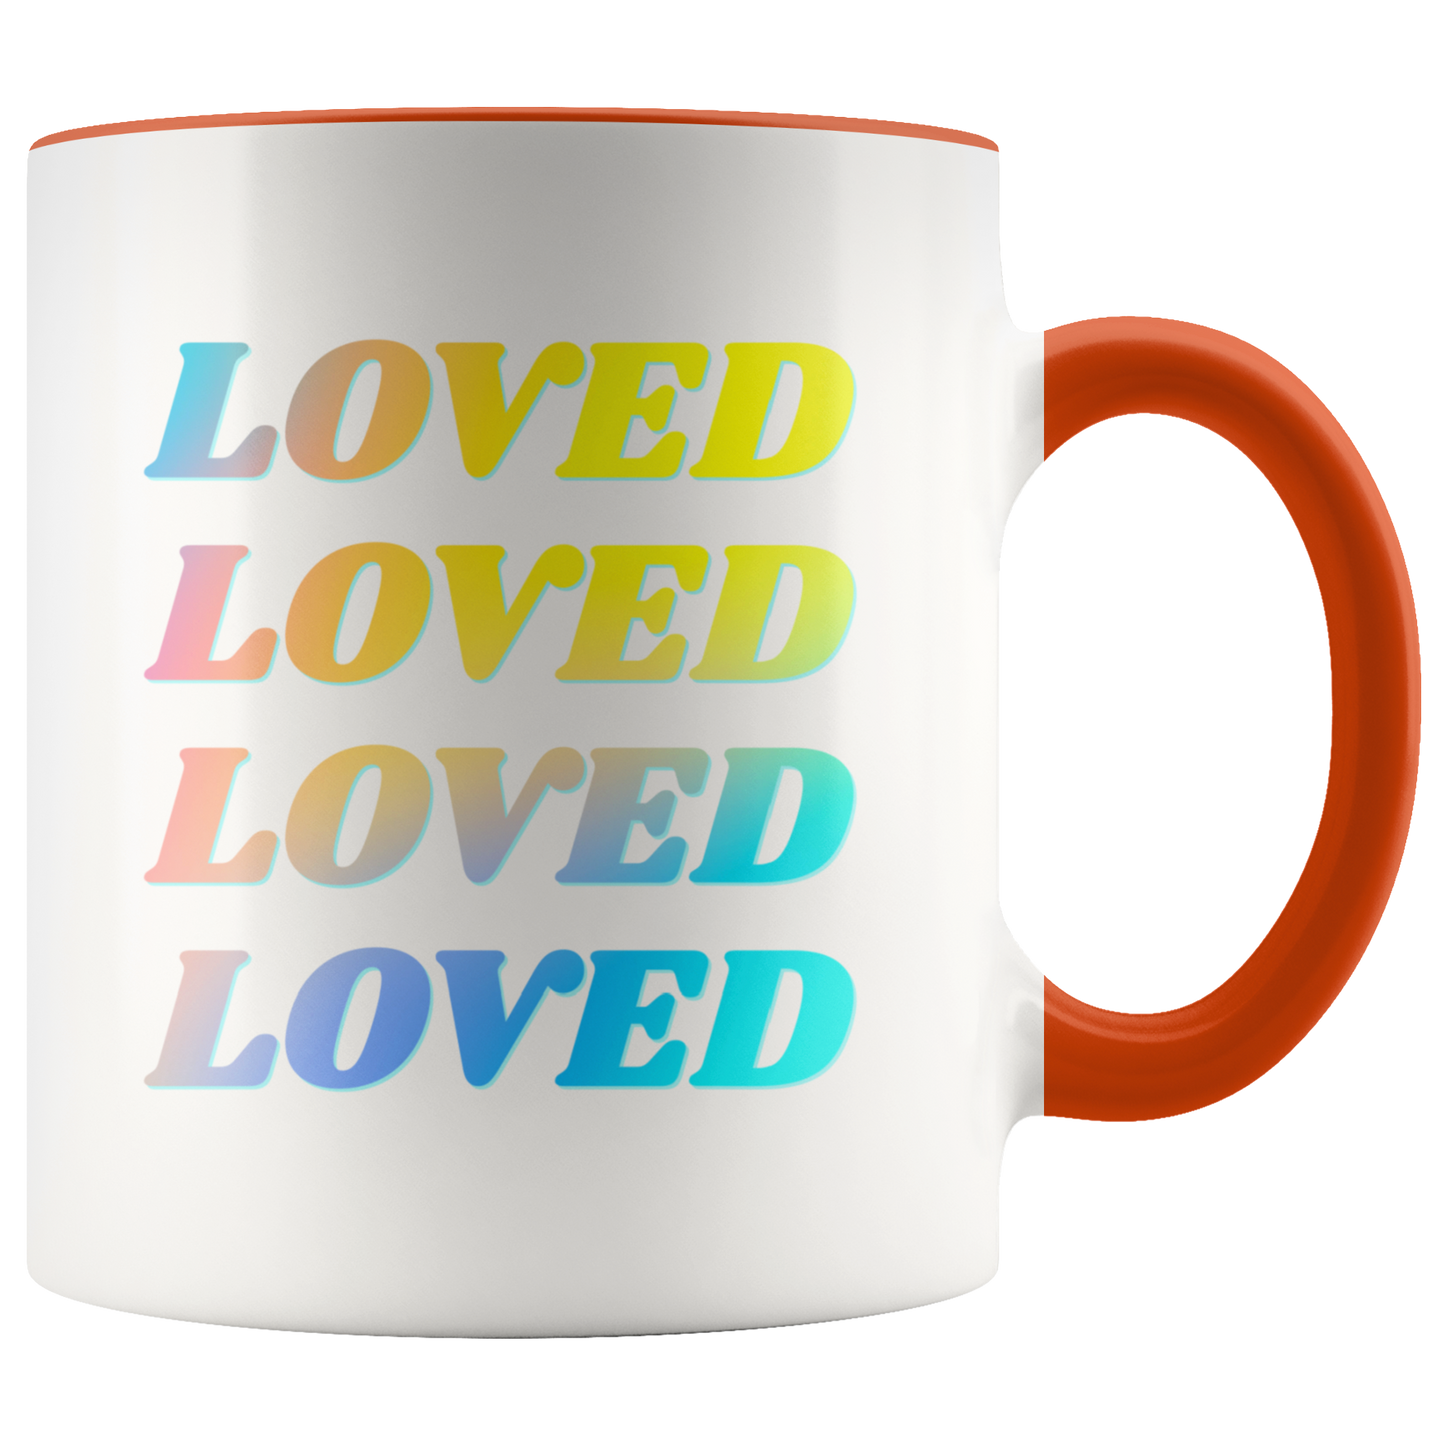 Loved Coffee Mug Christian Quote Coffee Gift For Friend Love Cup